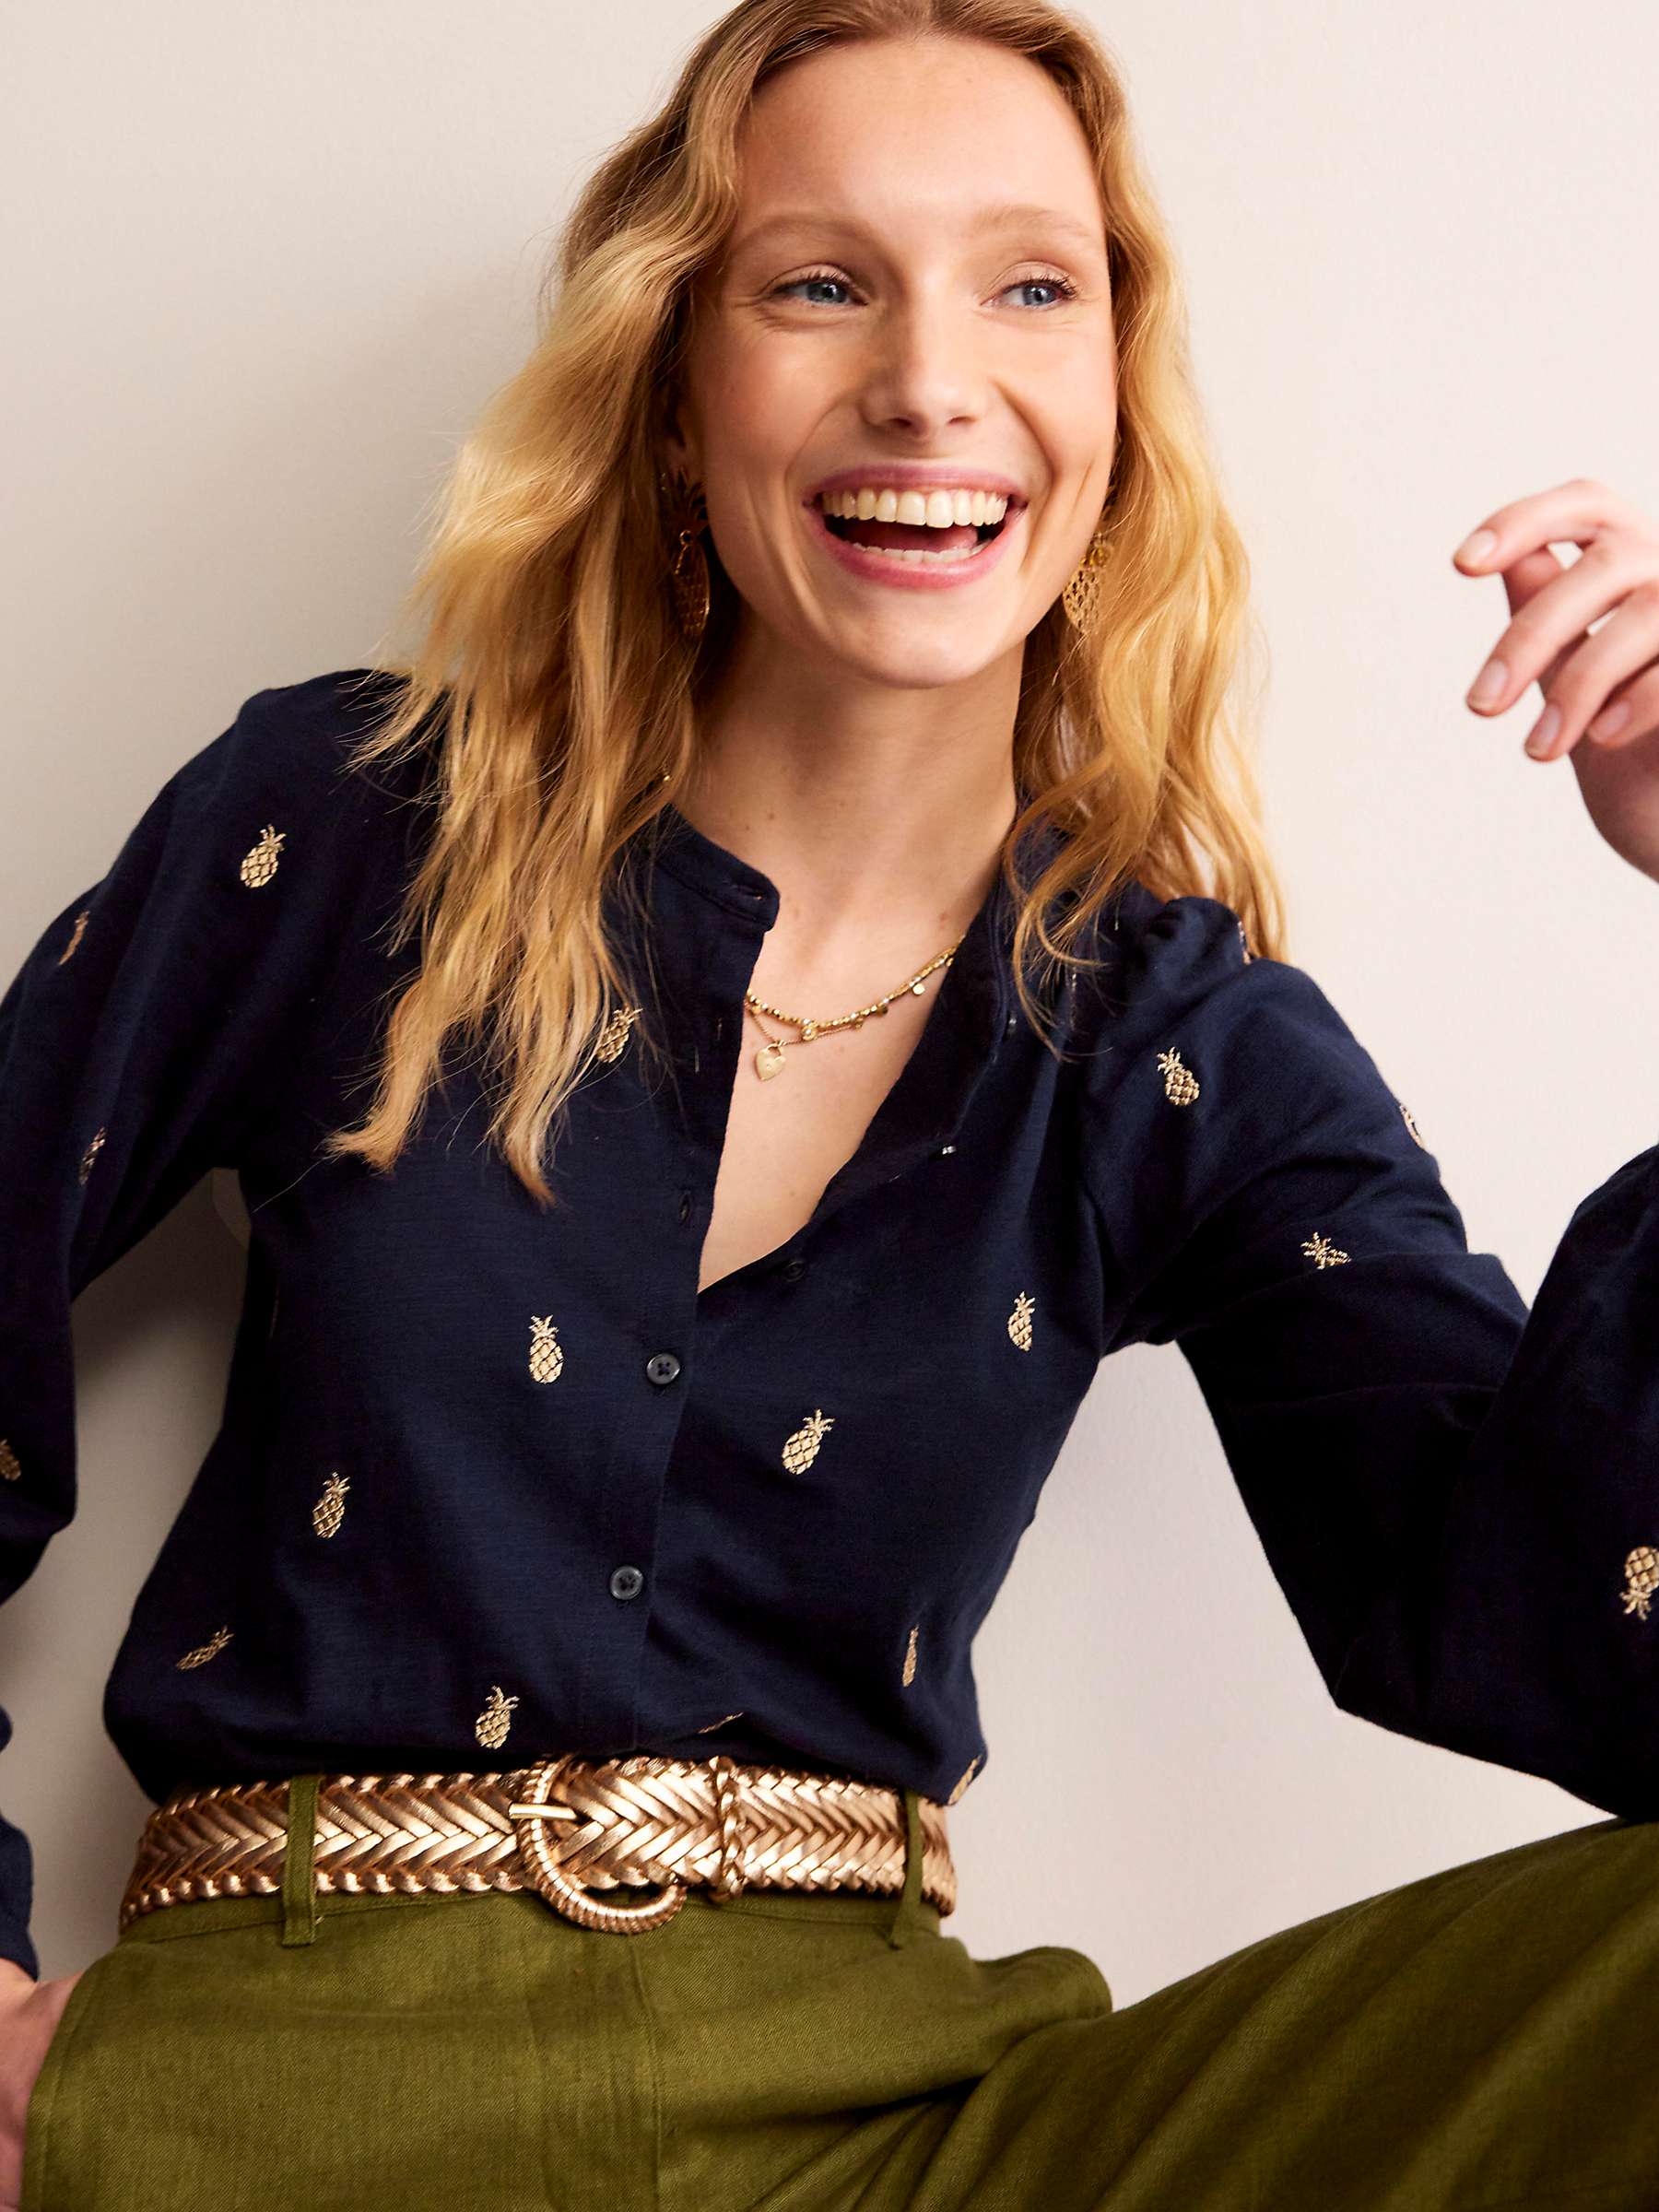 Buy Boden Marina Pineapple Embroidery Cotton Blouse, Navy Online at johnlewis.com